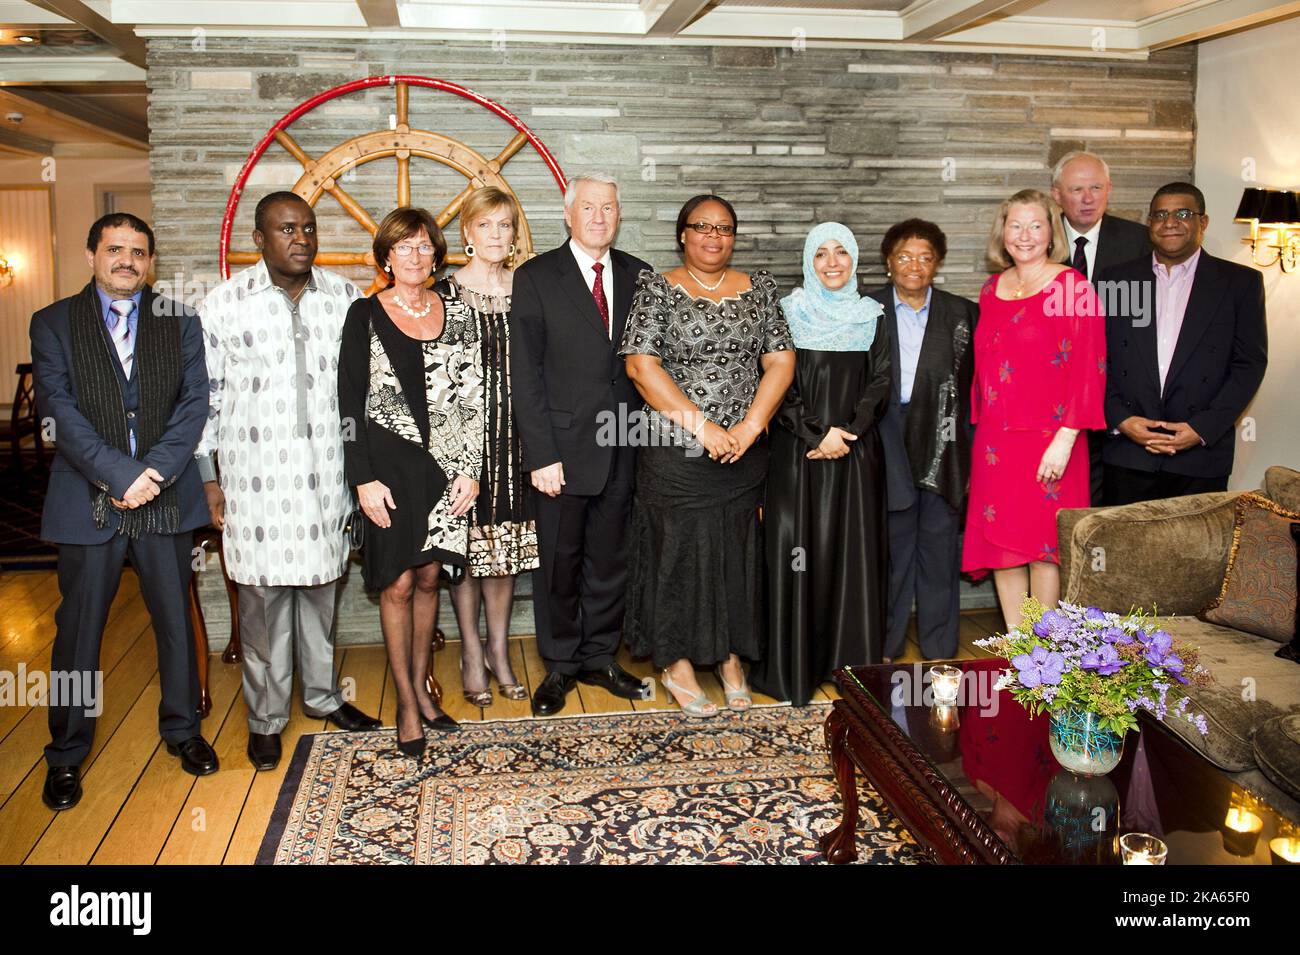 Nobel Peace Prize winners Liberian President Ellen Johnson-Sirleaf, the Liberian peace activist Leymah Gbowee and human rights activist Tawakul Karman from Yemen arrive with the Nobel committee chairman Thorbjørn Jagland and director of the Norwegian Nobel Institute Geir Lundestad to the Nobel committee's 'Little Dinner' at the Grand Hotel Friday December 9. Photo by Fredrik Varfjell / Scanpix Norway Stock Photo